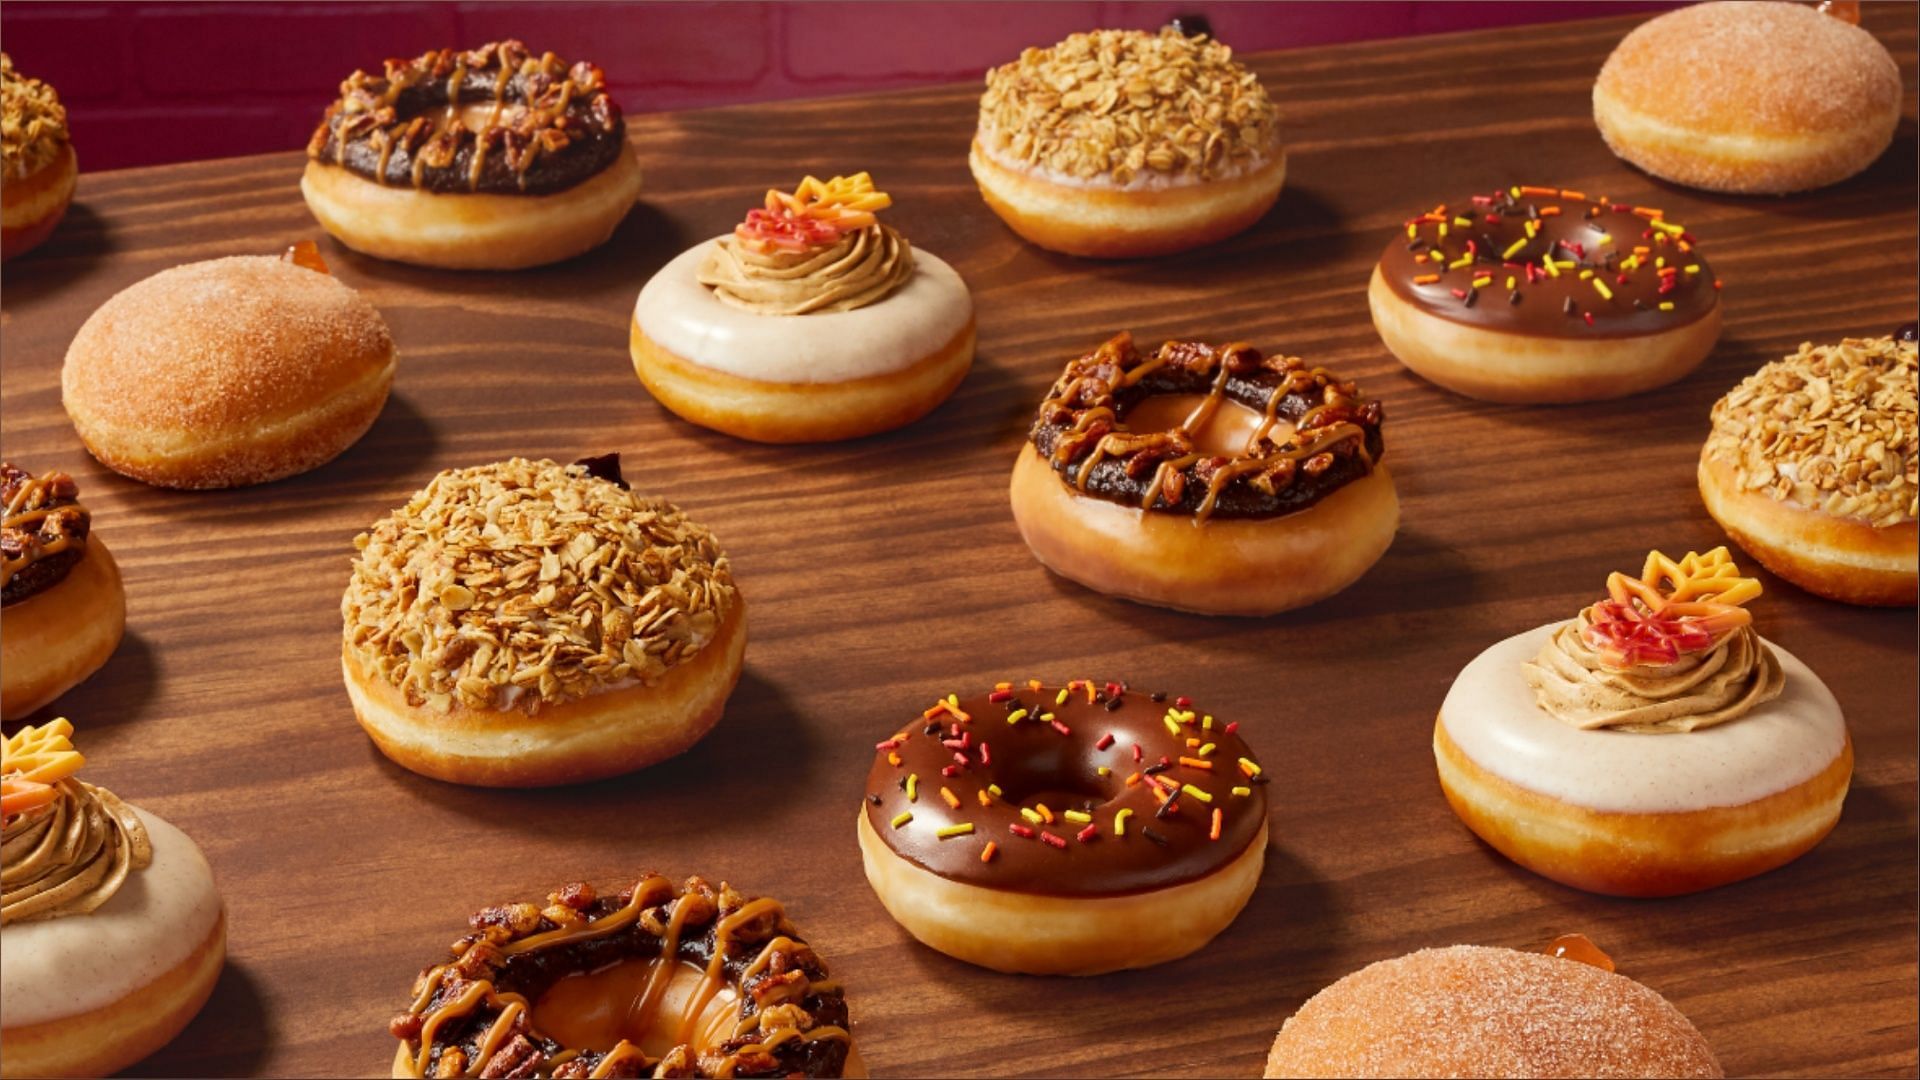 The Flavors of Fall collection hits stores nationwide on November 6 (Image via Krispy Kreme)